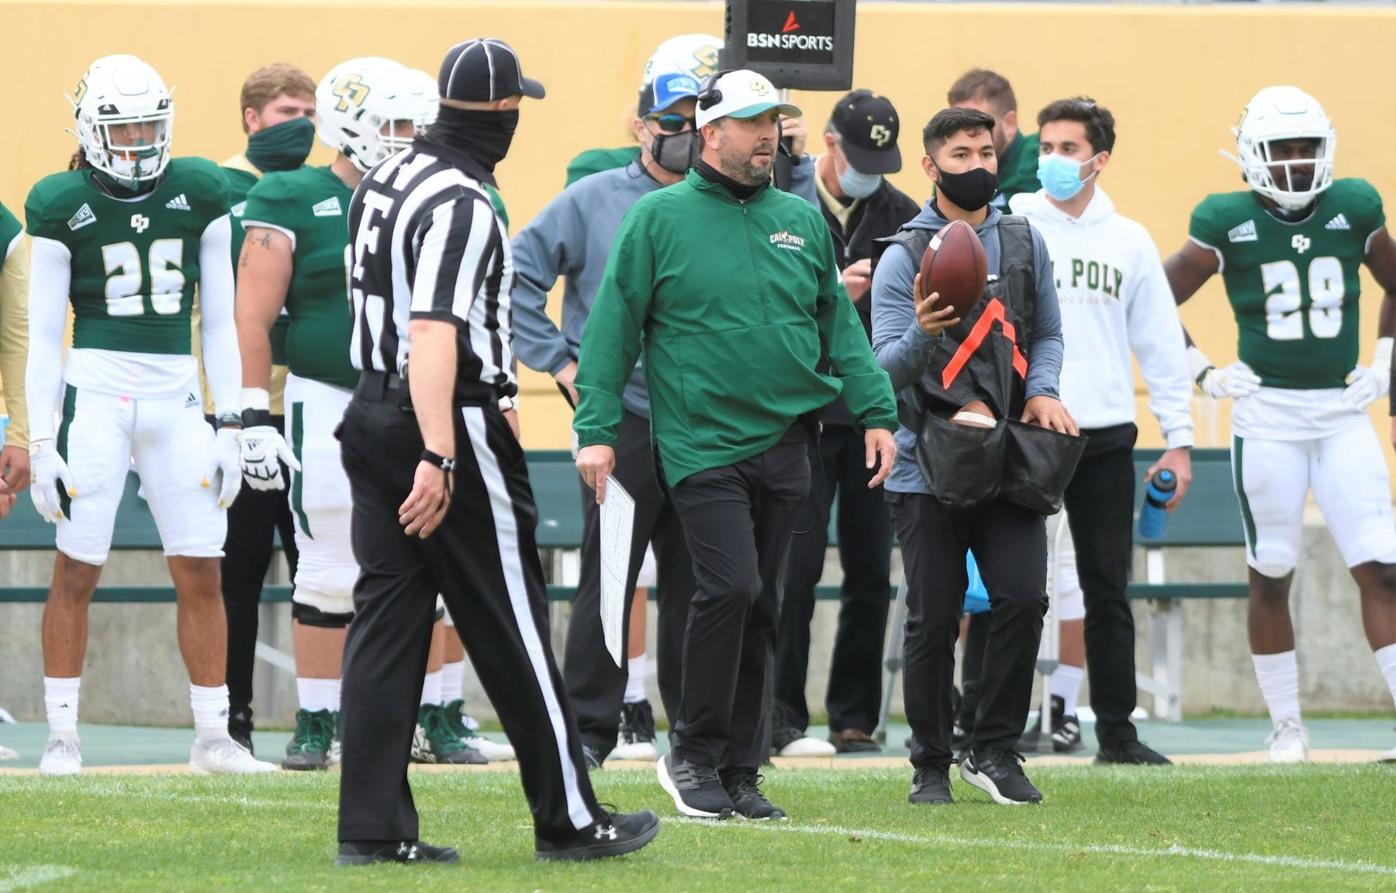 Football: Cal Poly opens camp ahead of 2021 season | College Sports